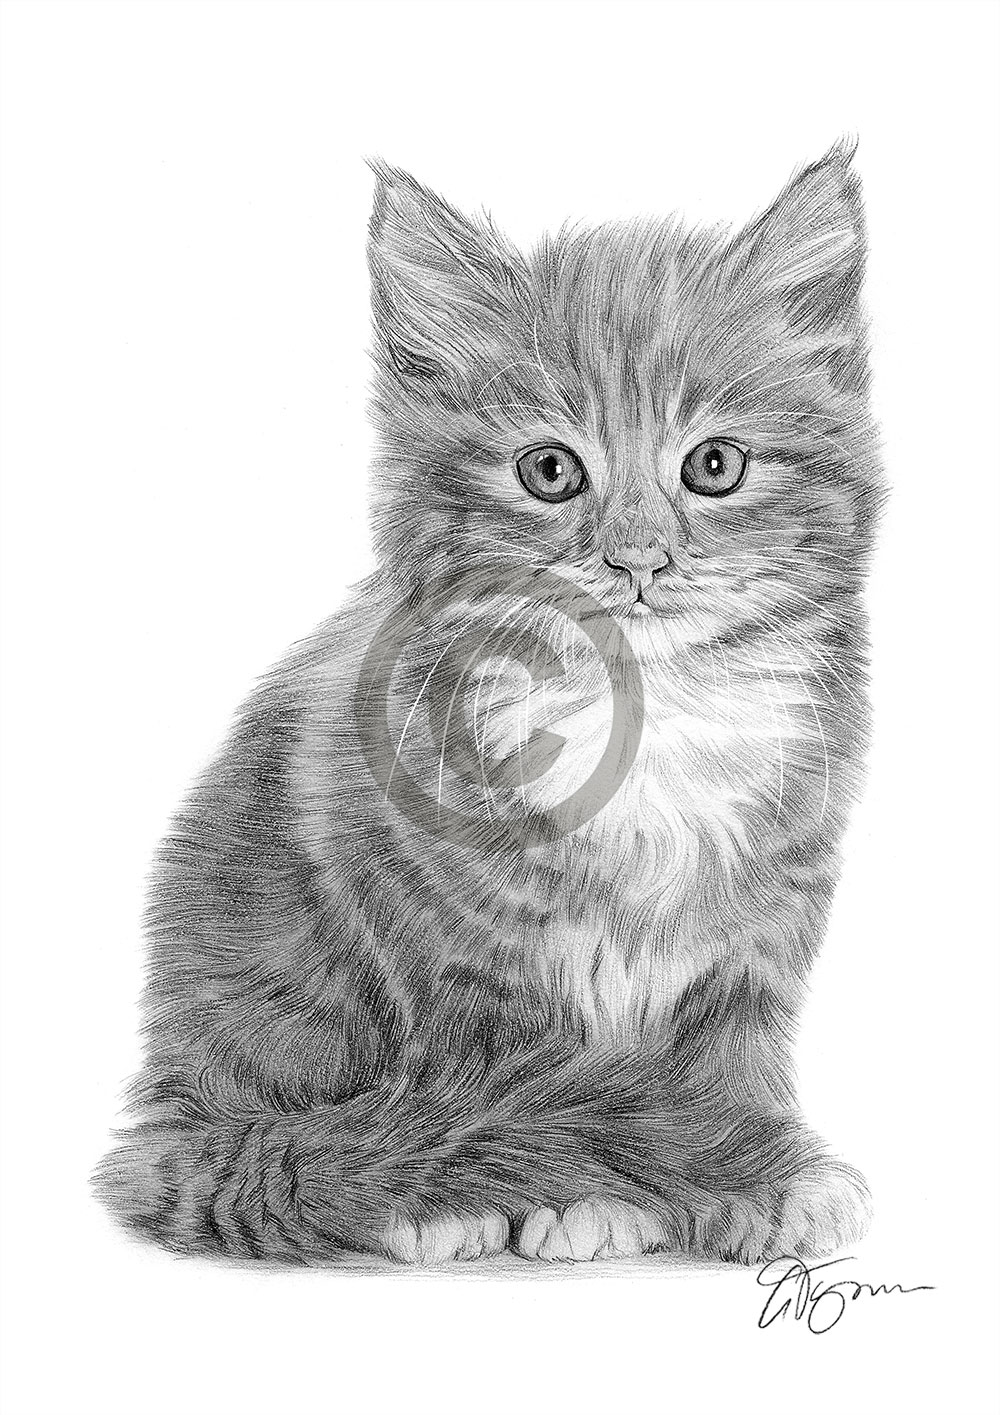 Pencil drawing of a young kitten by artist Gary Tymon